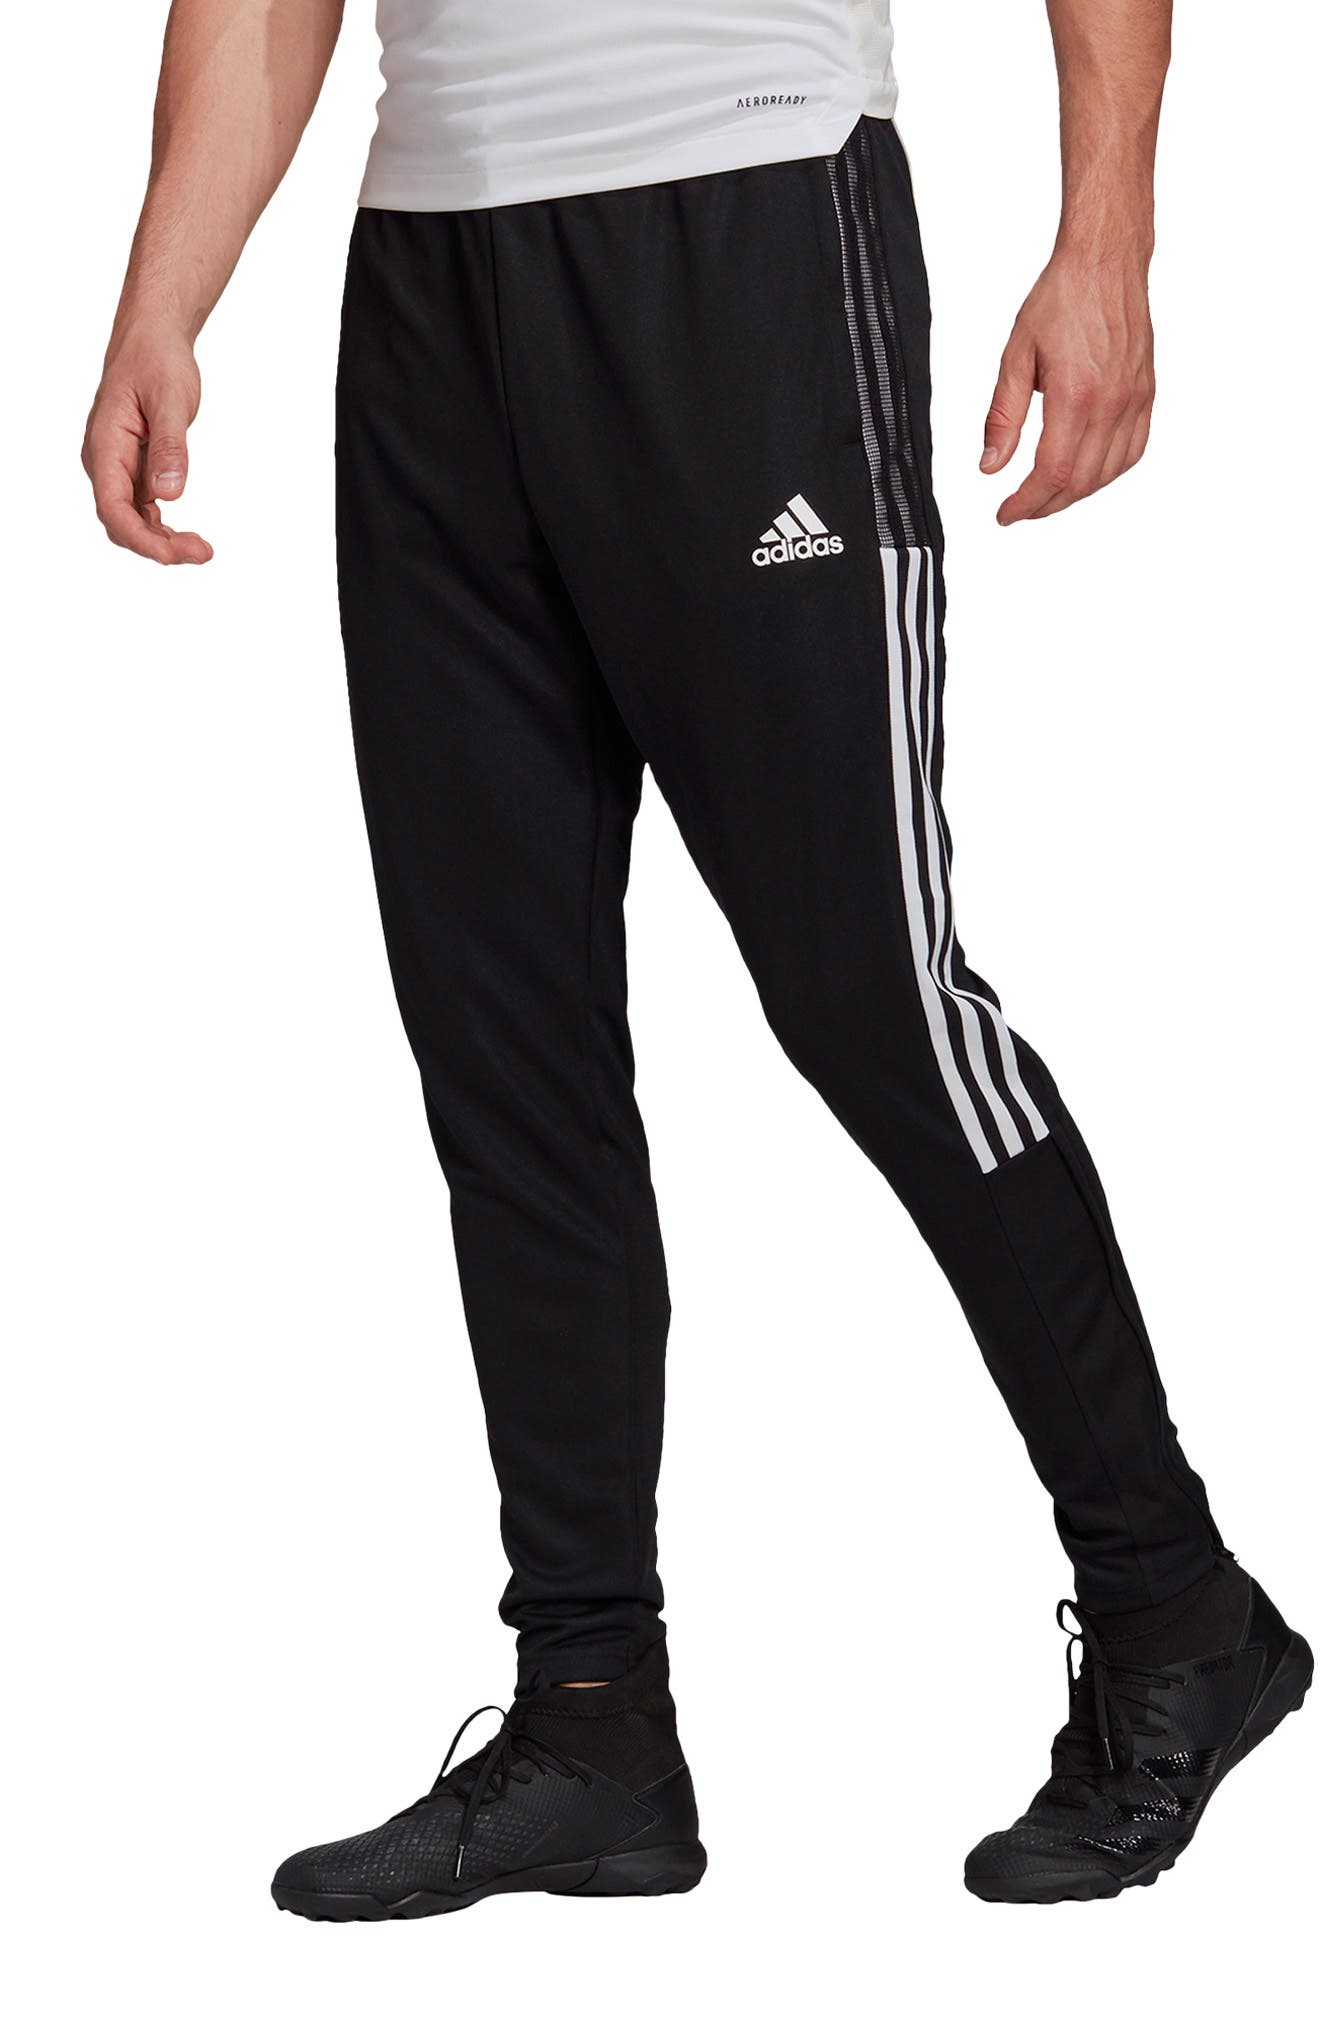 adidas sweat suit big and tall